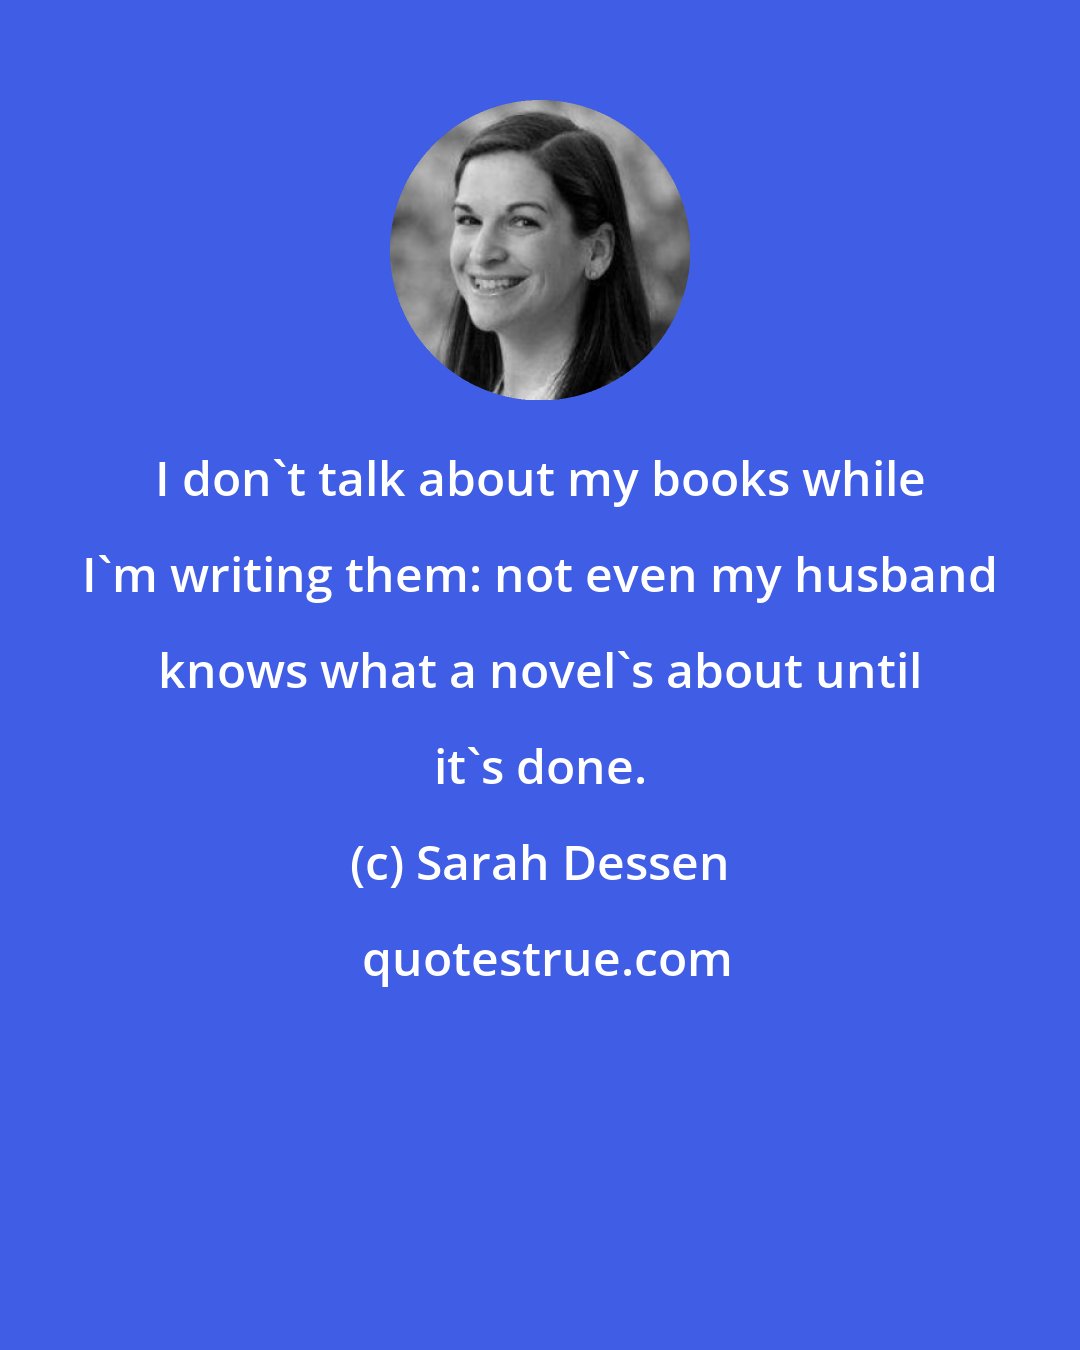 Sarah Dessen: I don't talk about my books while I'm writing them: not even my husband knows what a novel's about until it's done.